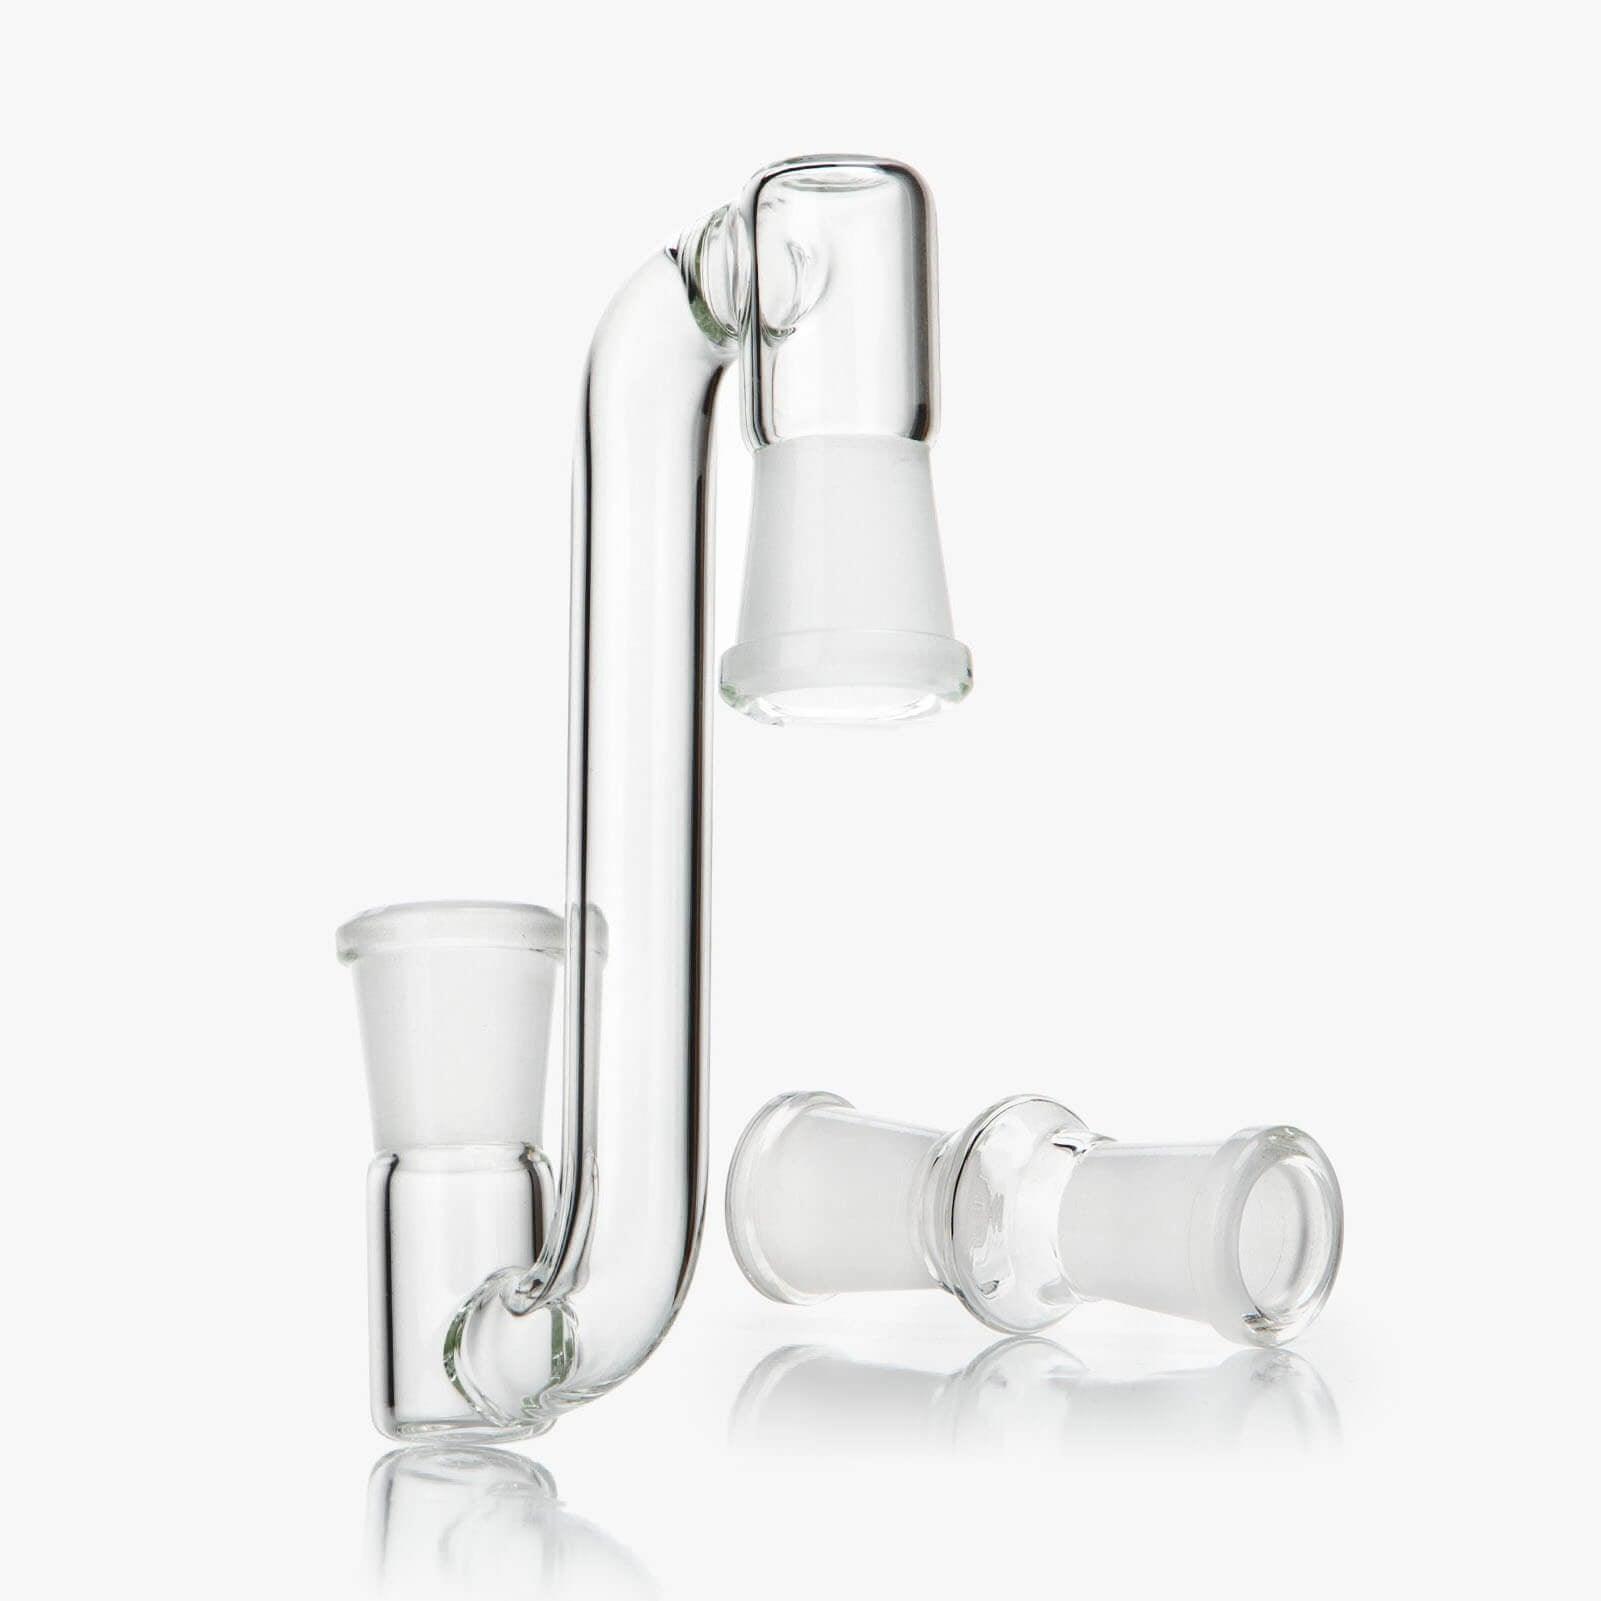 14mm Female to Female Glass Adapter 2Pcs (ONLINE ONLY)